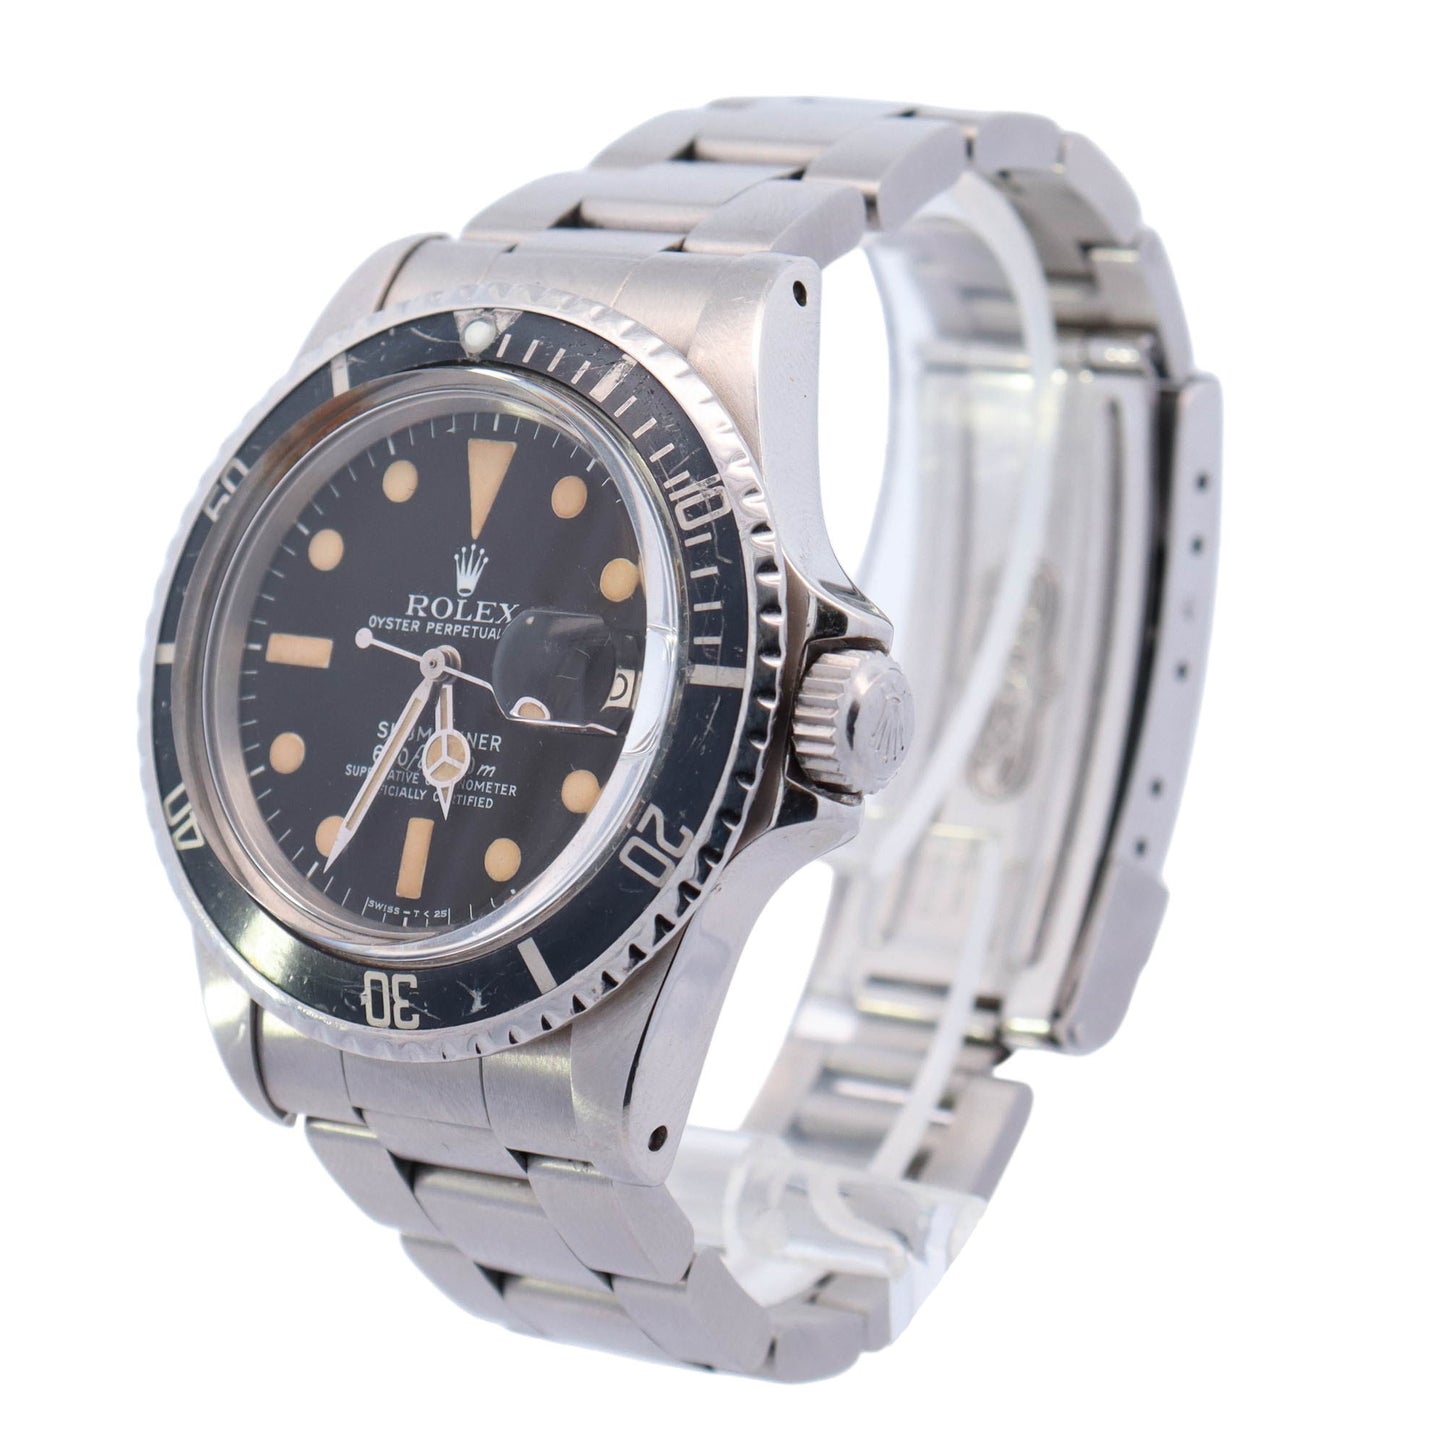 Rolex Submariner Stainless Steel 40mm Black Dot Dial Watch Reference# 1680 - Happy Jewelers Fine Jewelry Lifetime Warranty